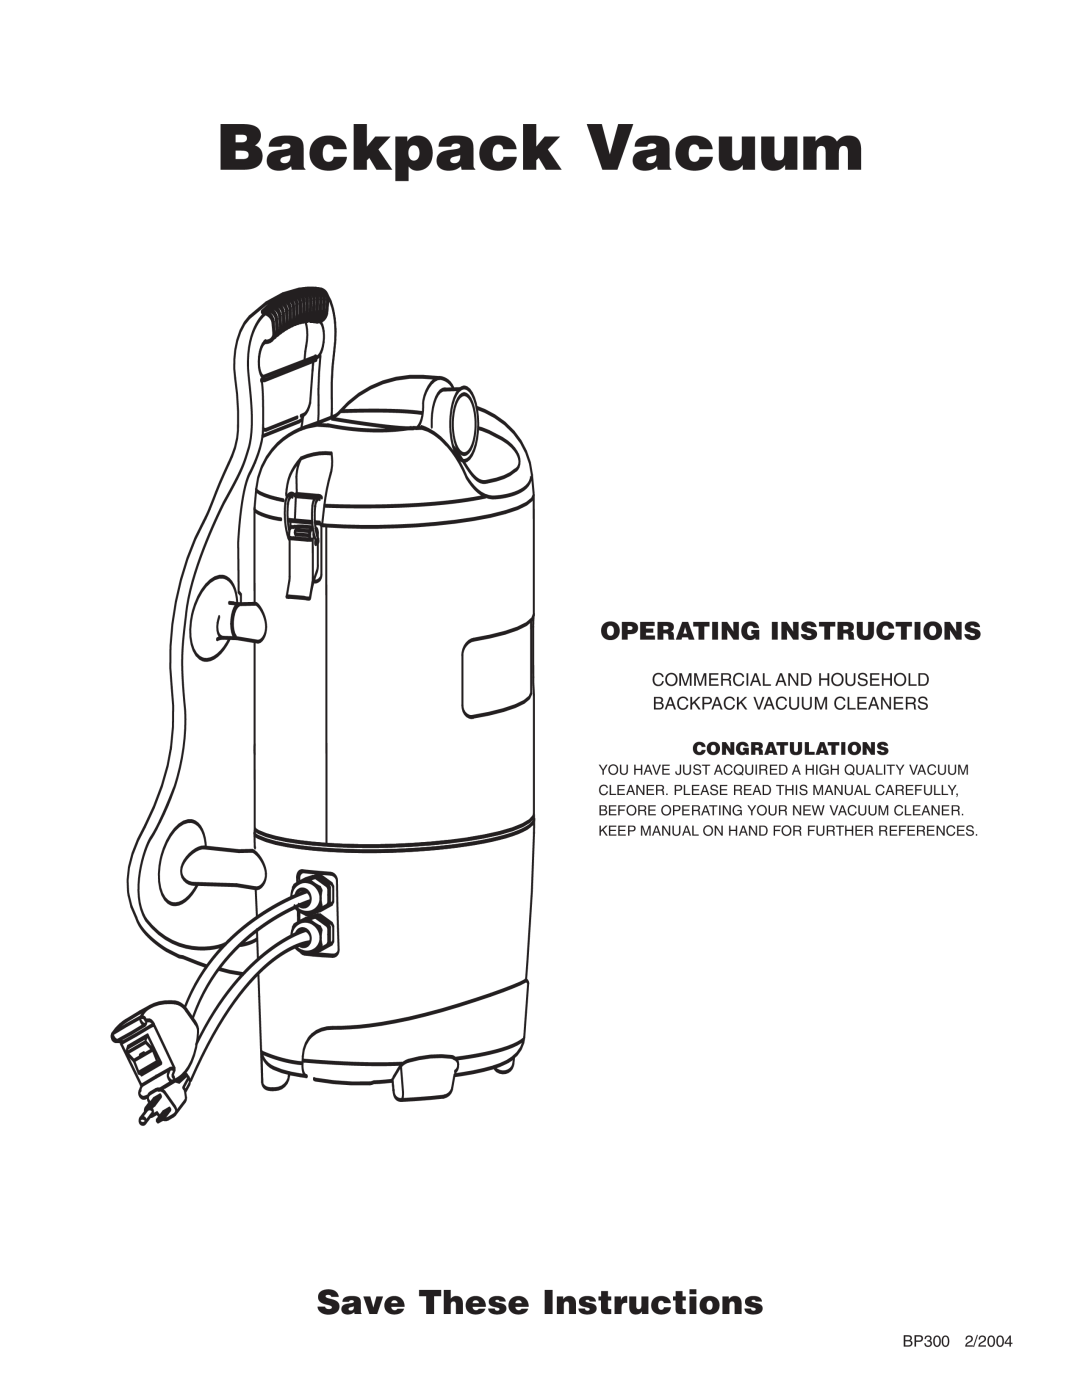 Philips BP300 manual Commercial And Household Backpack Vacuum Cleaners, Save These Instructions, Operating Instructions 